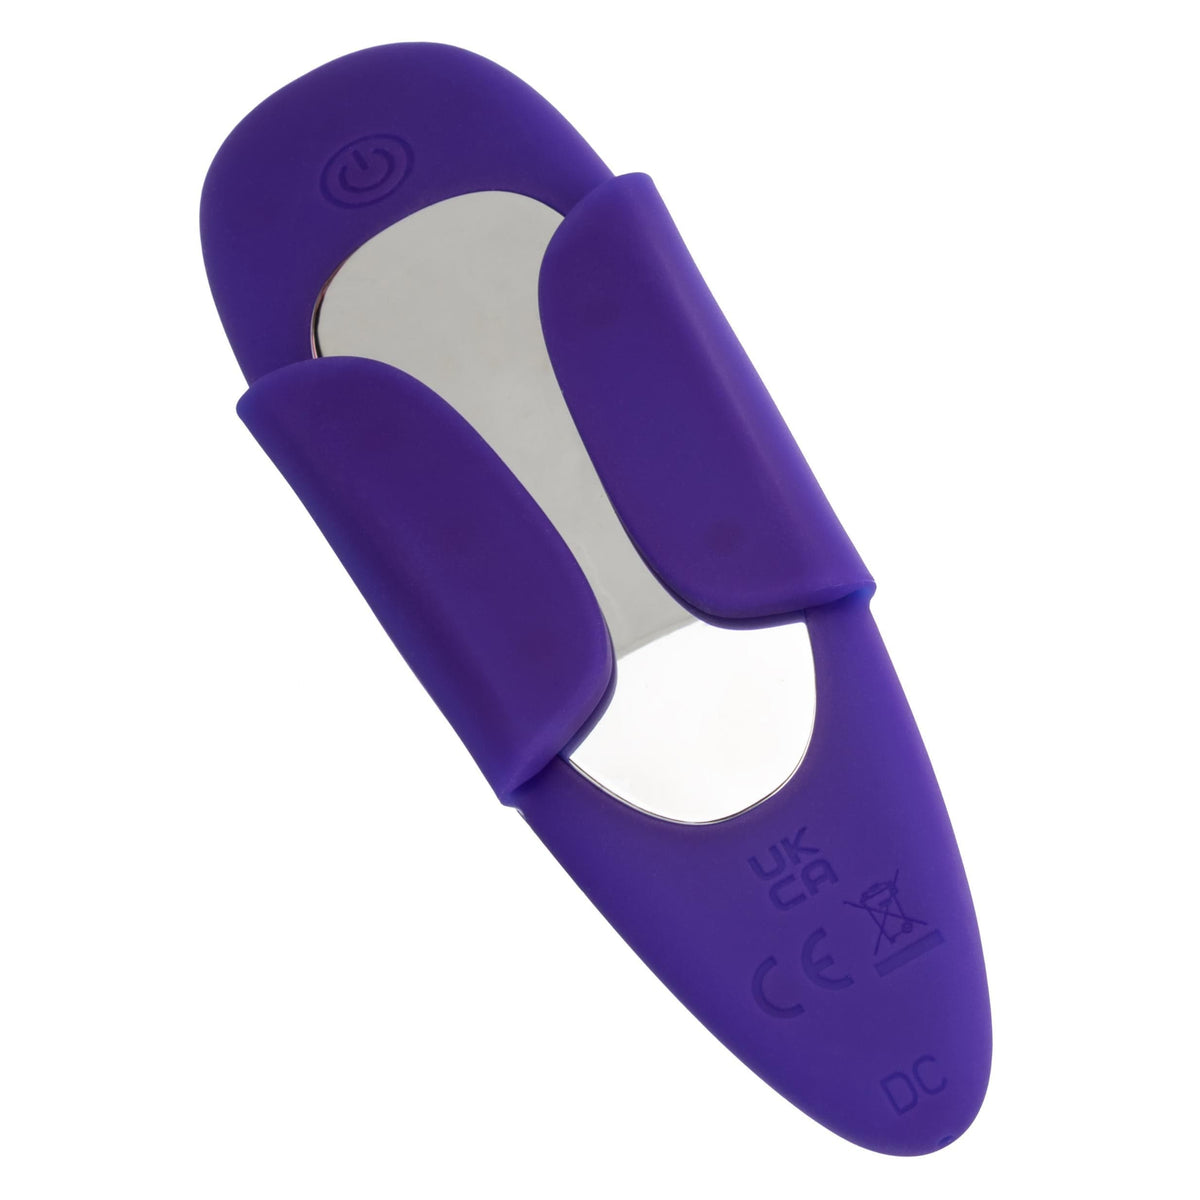 lock n play remote suction panty teaser purple